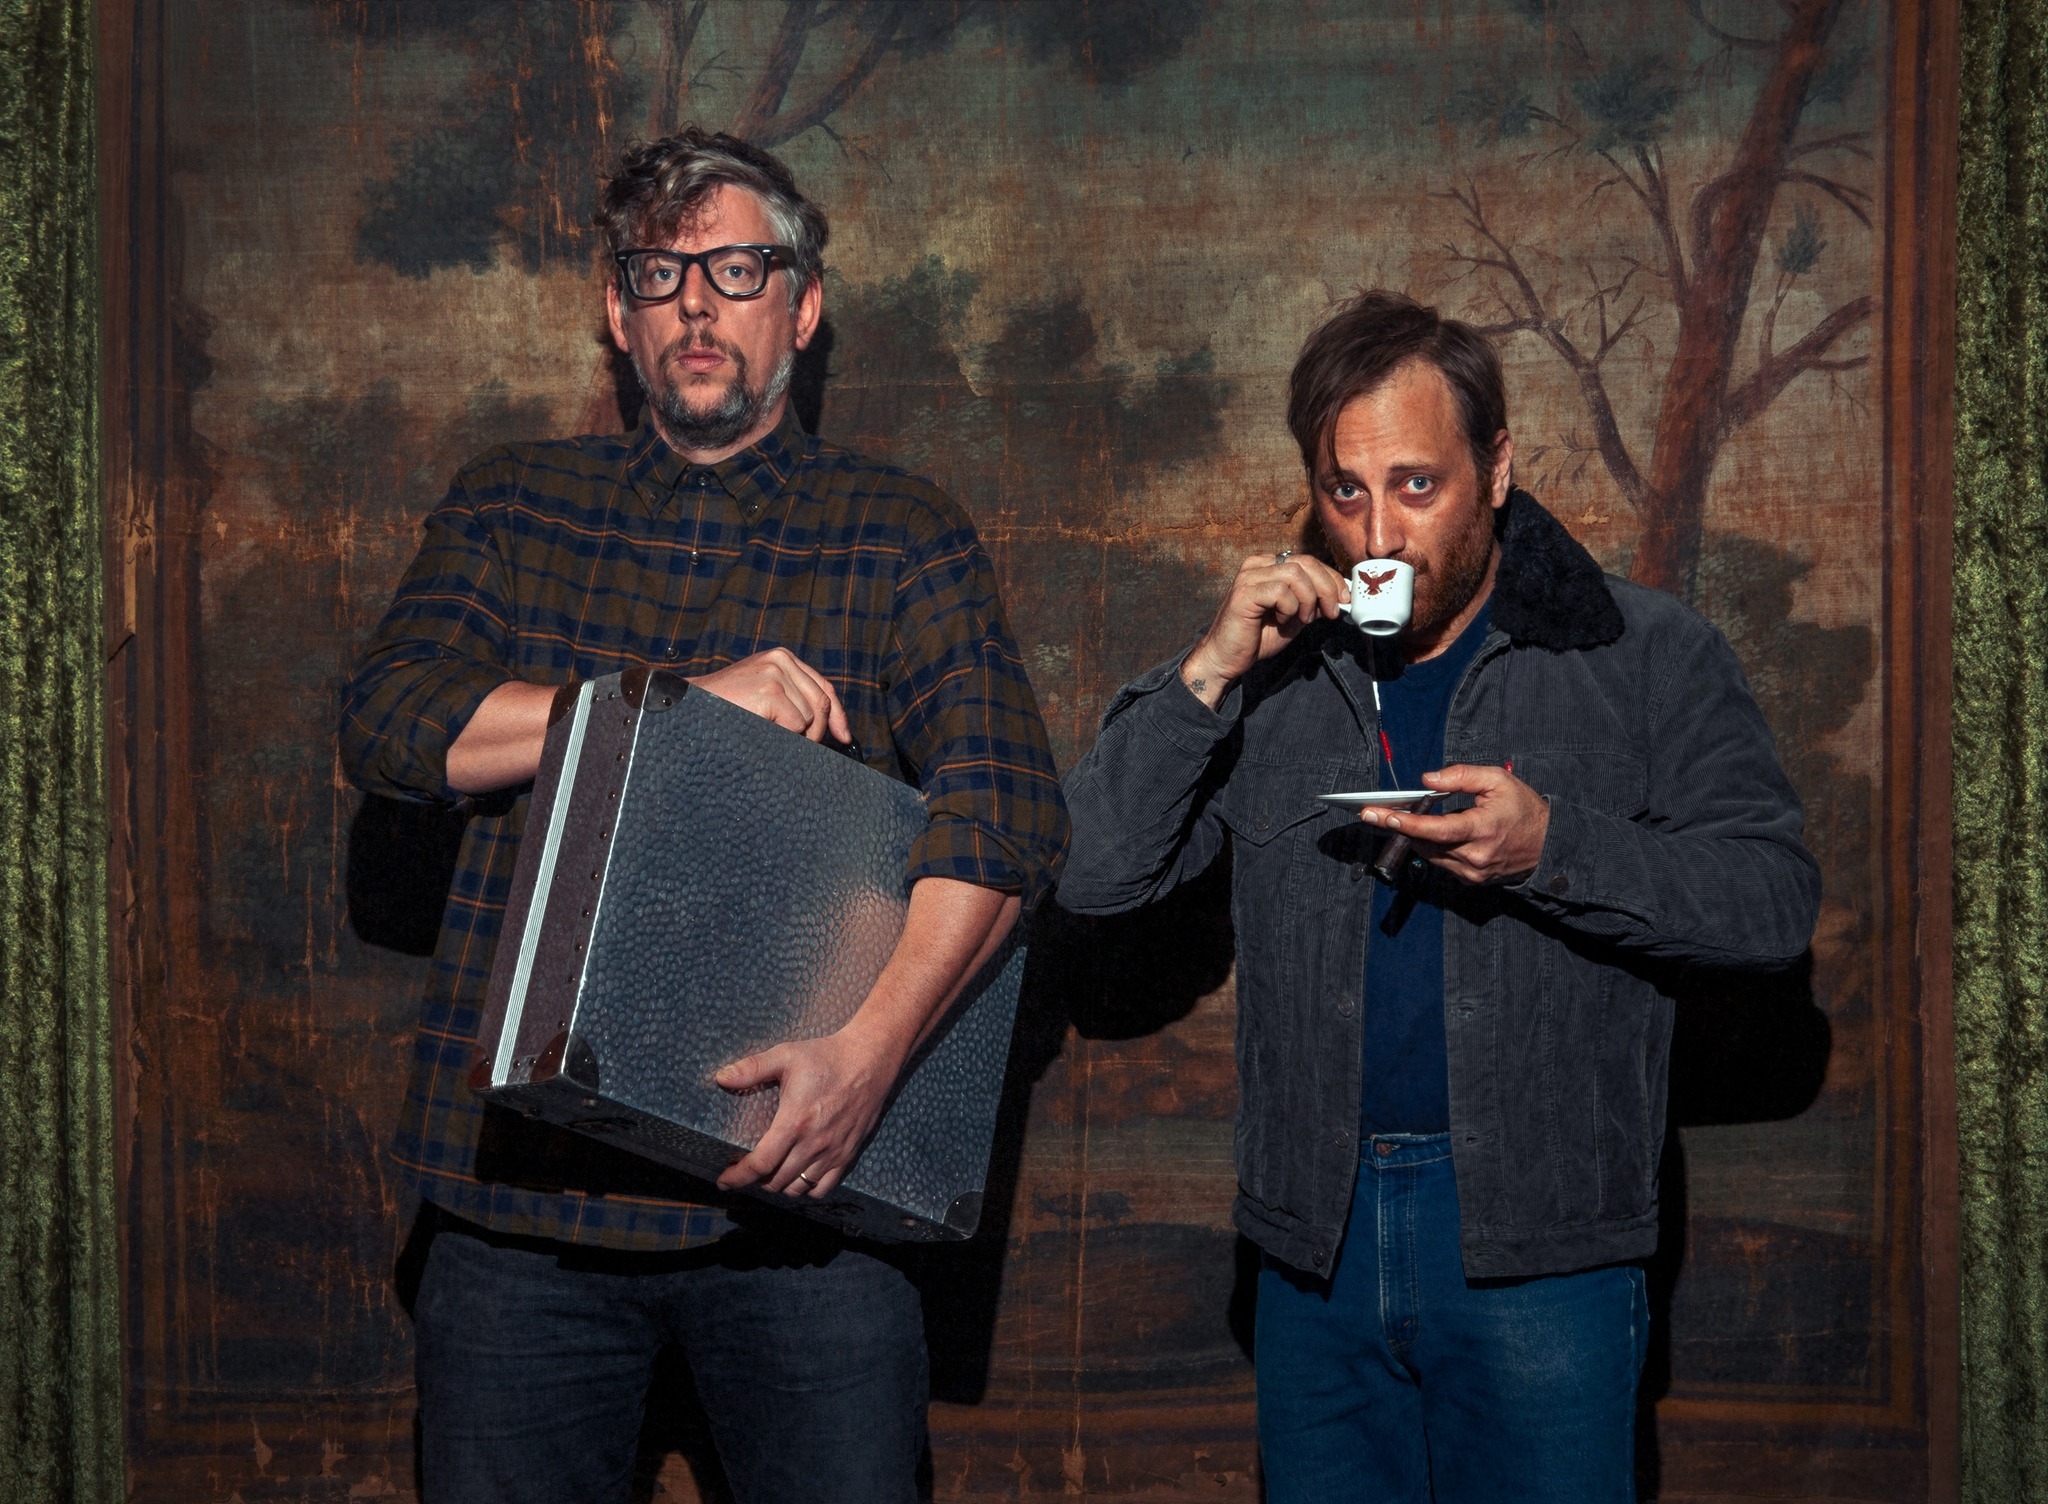 THE BLACK KEYS ANNOUNCE THEIR 11TH STUDIO ALBUM ‘DROPOUT BOOGIE’ – OUT MAY 13TH